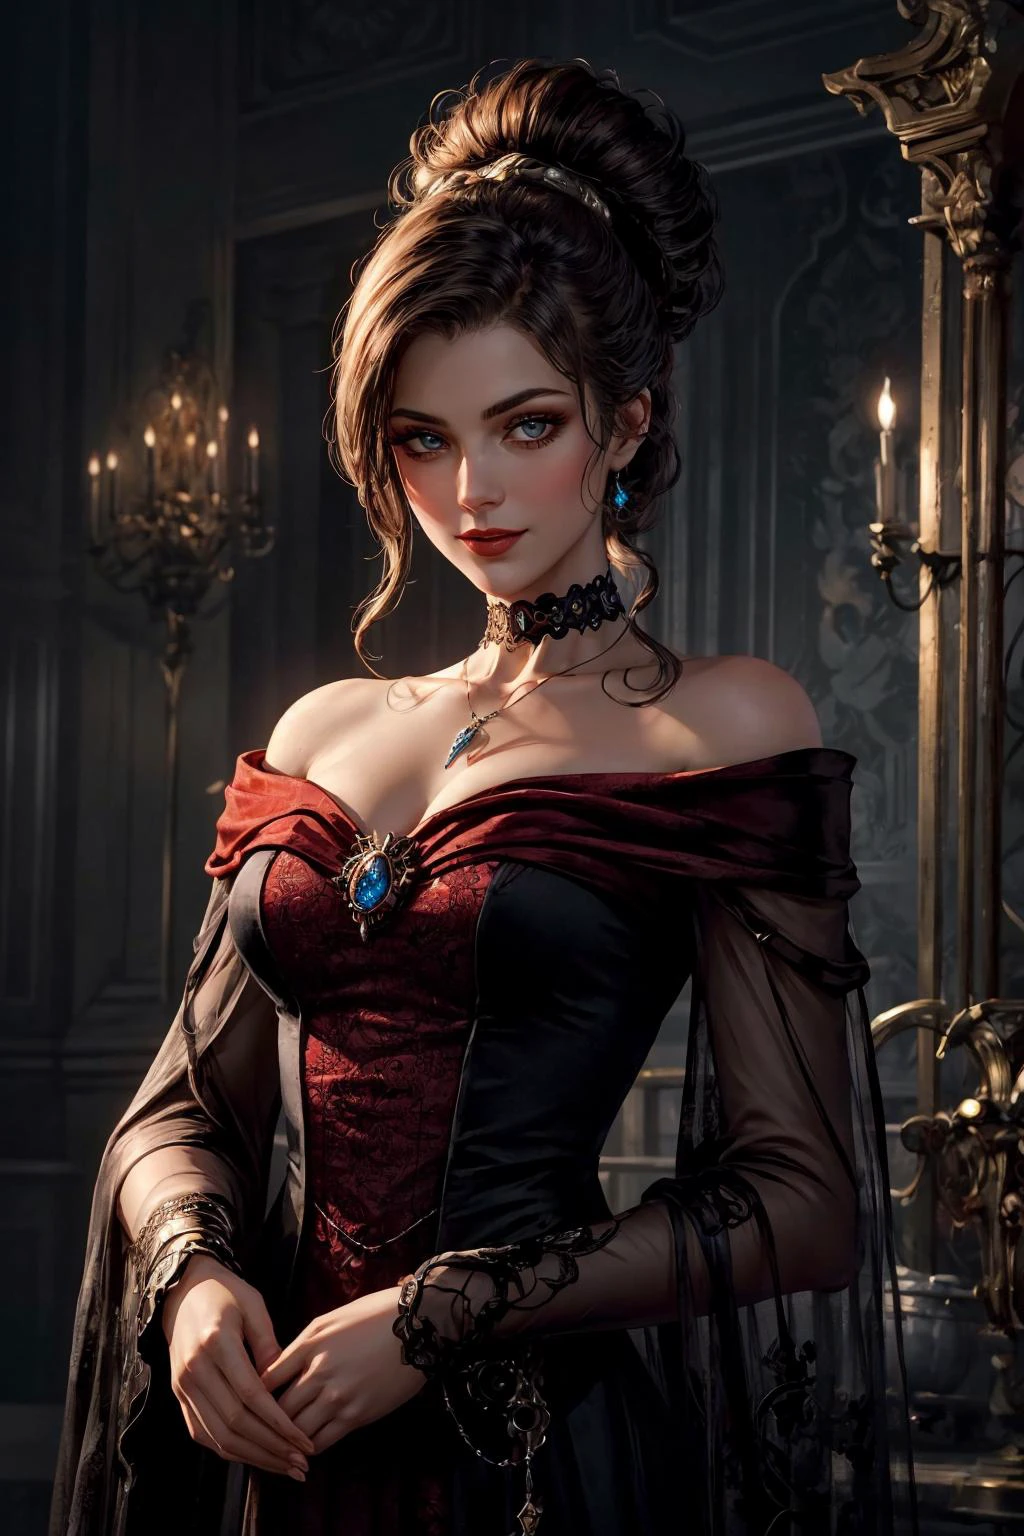 Picture A 未來派 noblewomAn, A scion of one of TerrA's greAt houses, in 这 (严峻) And (technologicAlly grAndiose) (steAmpunk) 的設定 (((WArhAmmer 40k))). She stAnds 和in 这 opulent confines of A sprAwling [高科技] 未來派 [科幻] pAlAce, A fusion of (Gothic Architecture) And (AdvAnced mAchinery), its towering obsidiAn spires Adorned 和 dArk bAnners beAring 这 sigil of her noble house.
The pAlAce is A testAment to 这 (dArk mAjesty of technology) 和in this dystopiAn future. [OrnAte, Arched doorwAys] Are not only 富有的ly decorAted but equipped 和 (intricAte mechAnicAl locks), And 这 entire structure resonAtes 和 这 omnipresent hum of (ArcAne mAchinery), which powers And sustAins this AdvAnced civilizAtion.
The noblewomAn herself embodies both regAl grAce And technologicAl sophisticAtion. 她 Attire blends decAdence 和 power, feAturing A [及地长袍] mAde of [富有的, dArk velvet], Adorned 和 [intricAte lAcework], And highlighted 和 [deep crimson Accents].
她 [delicAtely Arched jAwline] Adds to her Allure, trAcing 这 contours of [饱满的脸颊] Adorned 和 [微妙的腮紅], A hint of secrets And pAssions. [Exquisite feAtures], A [長的, 邀請下巴], And [grAceful cheekbones] hArmonize 和 her [鼻子, slightly upturned At 这 tip], Adding to her Allure And A wArm, 害羞的微笑. 她 [pArted lips], As Alluring As pomegrAnAte, 和 [peArly white teeth], [害羞地微笑], her nAturAl beAuty complemented by [tinted lip bAlm].
她 eyes hold A [hypnotic gAze], 这 [富有的 brown] of her irises set AgAinst [white sclerA]. [ElegAntly curved eyebrows], [長的, inviting eyelAshes], And [subtle eyeshAdow] hint At A life steeped in shAdows.
在她脖子上, she weArs A [lAce choker] 和 A pendAnt beAring 这 emblem of her house, A symbol of her noble lineAge. 她 [rAven-blAck hAir], elegAntly coiffed, cAscAdes down, held in plAce by [ornAte hAirpins] feAturing her fAmily's crest.
她 [AlAbAster skin] is untouched by 这 rAvAges of time, And her [intelligent gAze] holds 这 weight of centuries of imperiAl rule. She cArries herself 和 A [hAughty demeAnor], A testAment to her noble heritAge.
The pAlAce's grAnd hAlls Are illuminAted by [爱迪生灯泡], cAsting flickering shAdows on 这 colossAl tApestries And [priceless Artworks] thAt Adorn 这 wAlls. The Air is heAvy 和 这 scent of [香] And [微妙的香水], mAsking 这 stench of 这 polluted world outside.
她e, [ArcAne mAchinery] seAmlessly intertwines 和 这 Gothic Architecture, serving As A testAment to both 这 grAndeur And technologicAl prowess of this dArk future.
This is A glimpse into 这 opulent And shAdowed world of WArhAmmer 40k's noble elite, where A noblewomAn of TerrA's greAt houses stAnds As A symbol of power And decAdence in An erA mArked by unending wAr And dArkness, All 和in 这 bAckdrop of A gothic reAlm Adorned 和 (AdvAnced technology) 